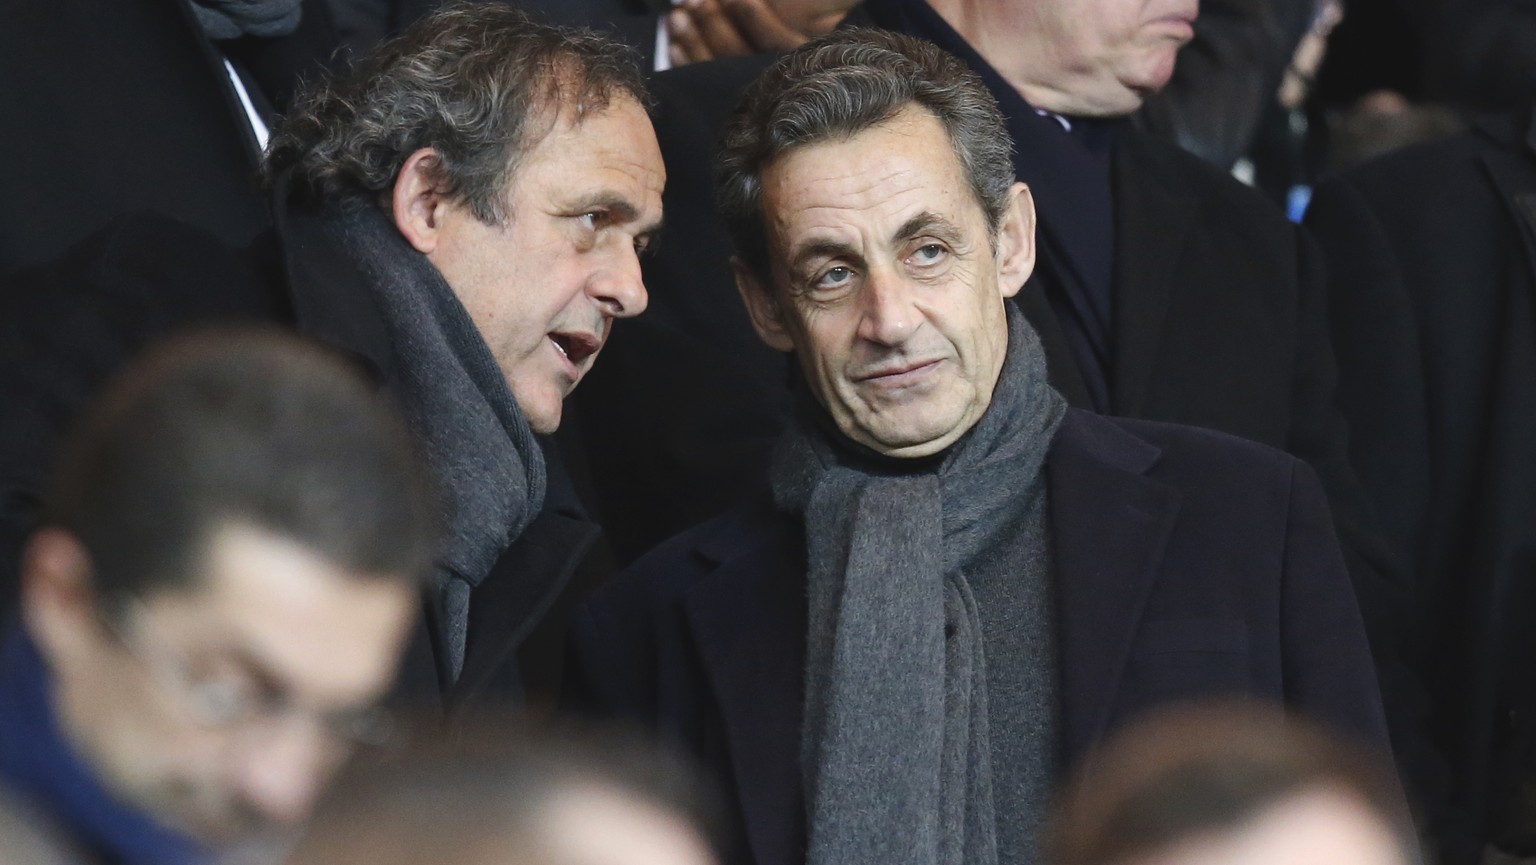 Former French President Nicolas Sarkozy, right, listens to UEFA President Michel Platini, before the Champions League round of 16 first leg soccer match between Paris Saint Germain and Chelsea at the  ...